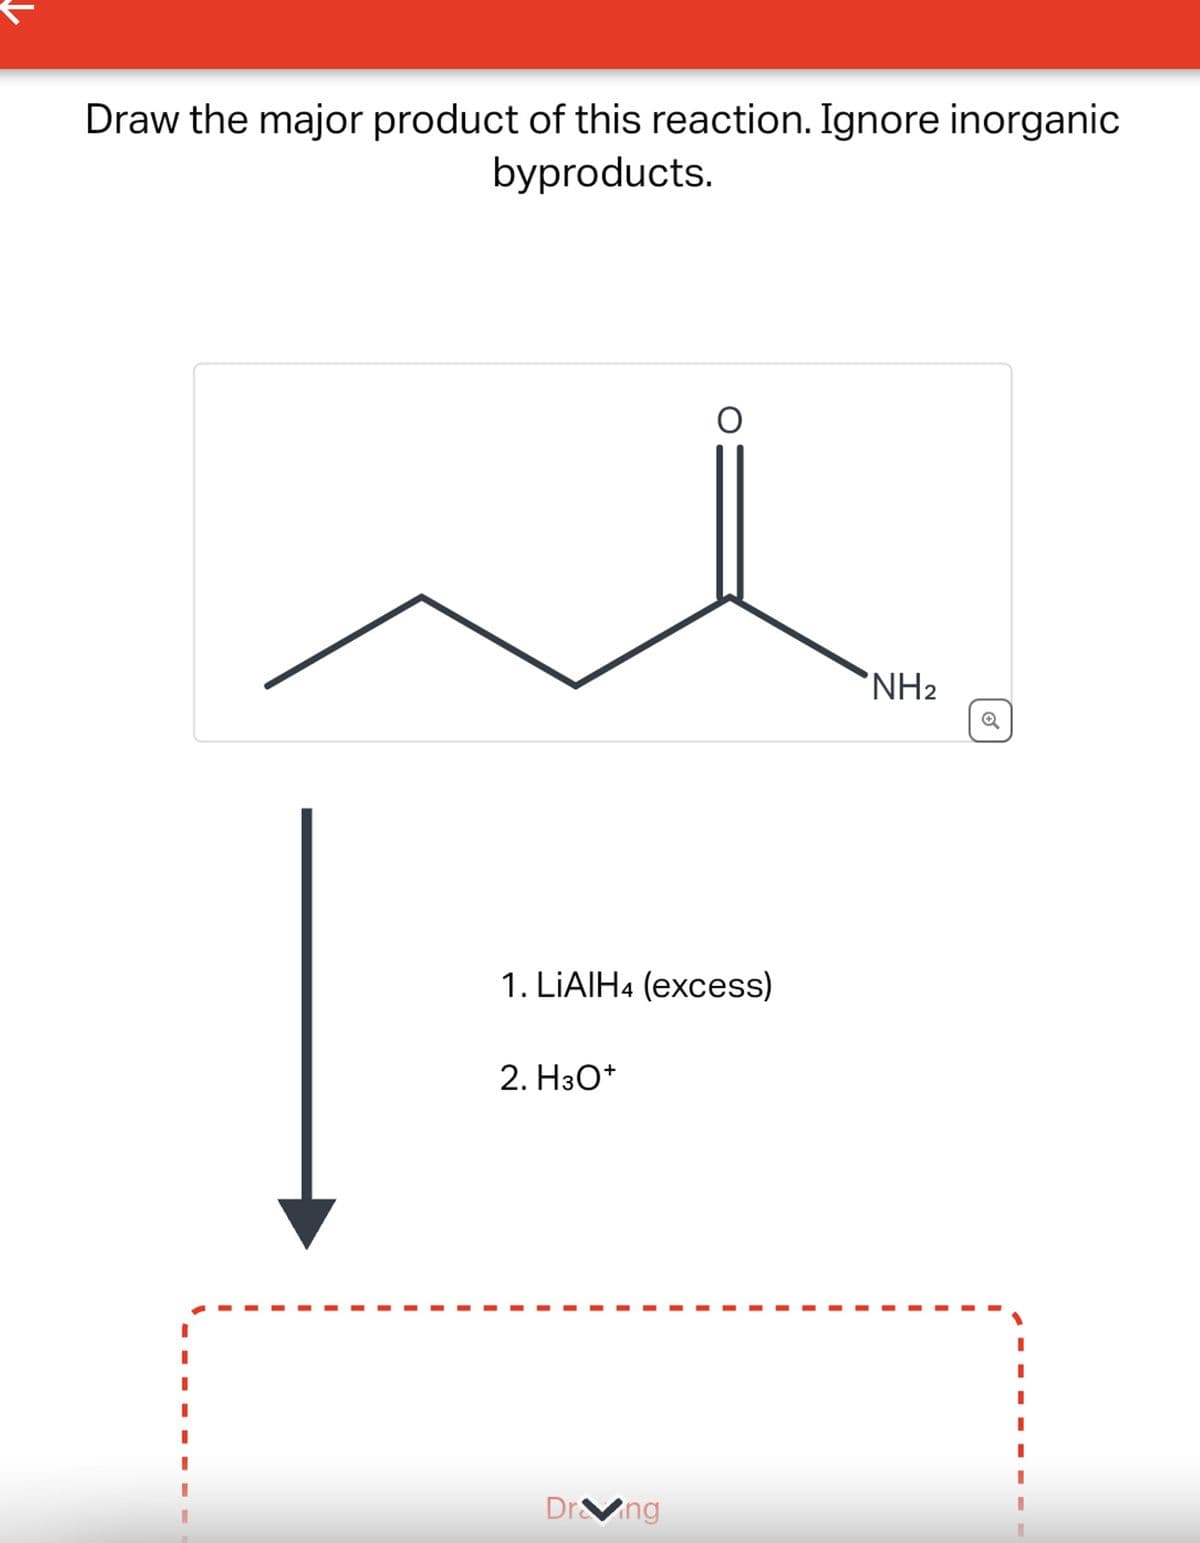 Draw the major product of this reaction. Ignore inorganic
byproducts.
1. LiAlH4 (excess)
2. H3O+
Drang
NH2